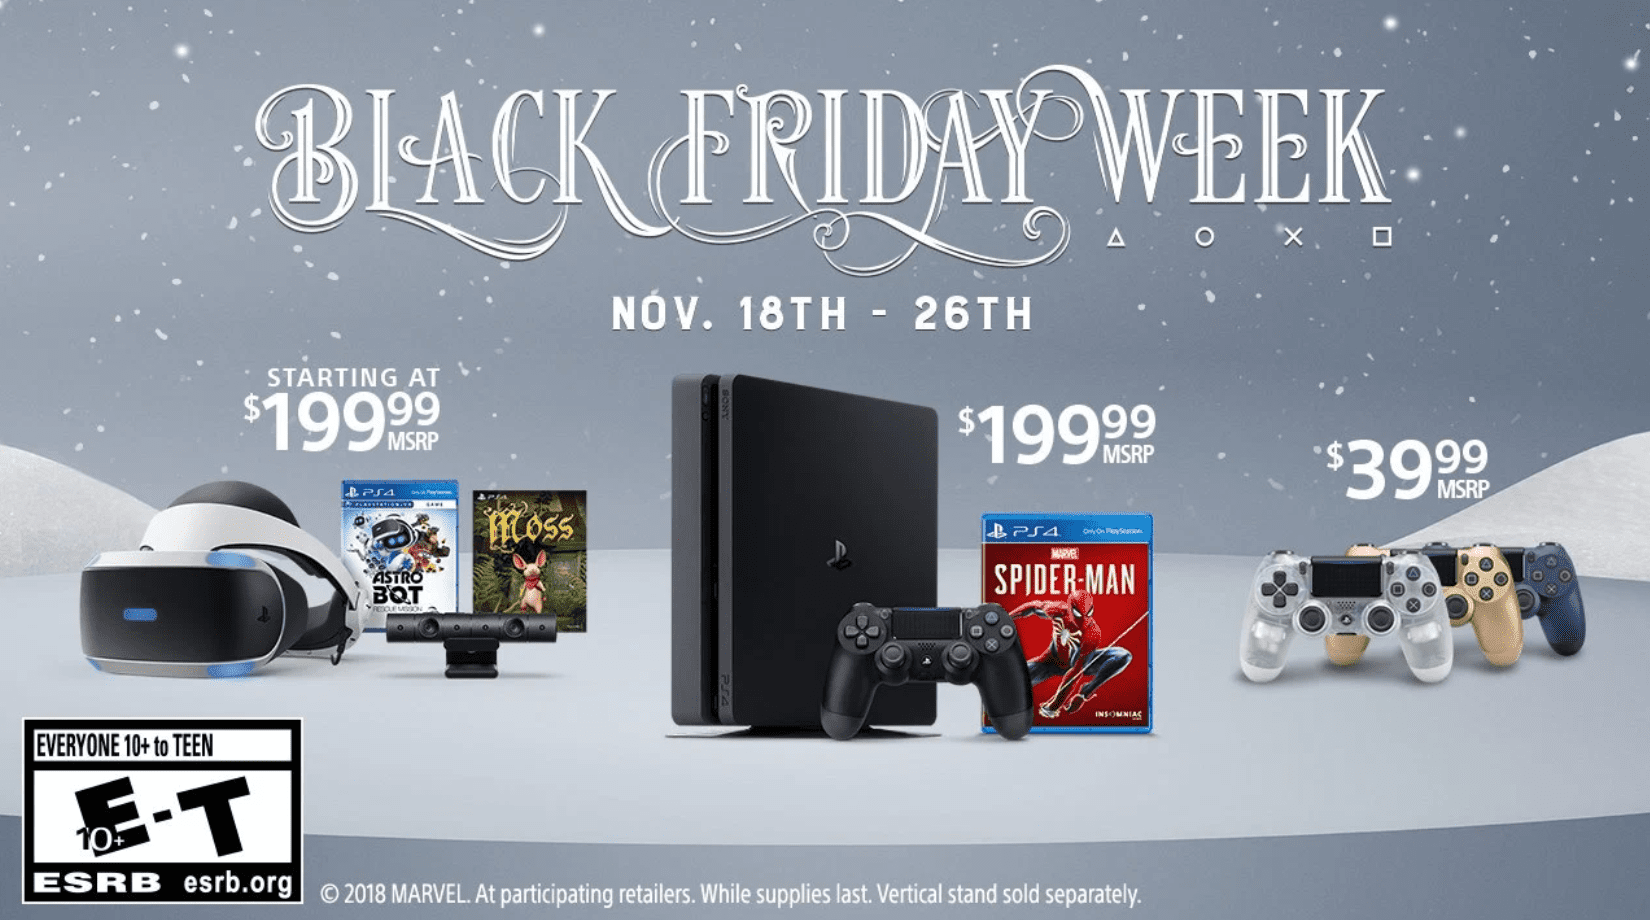 Image showing Sony Playstation Black Friday bundle offers.